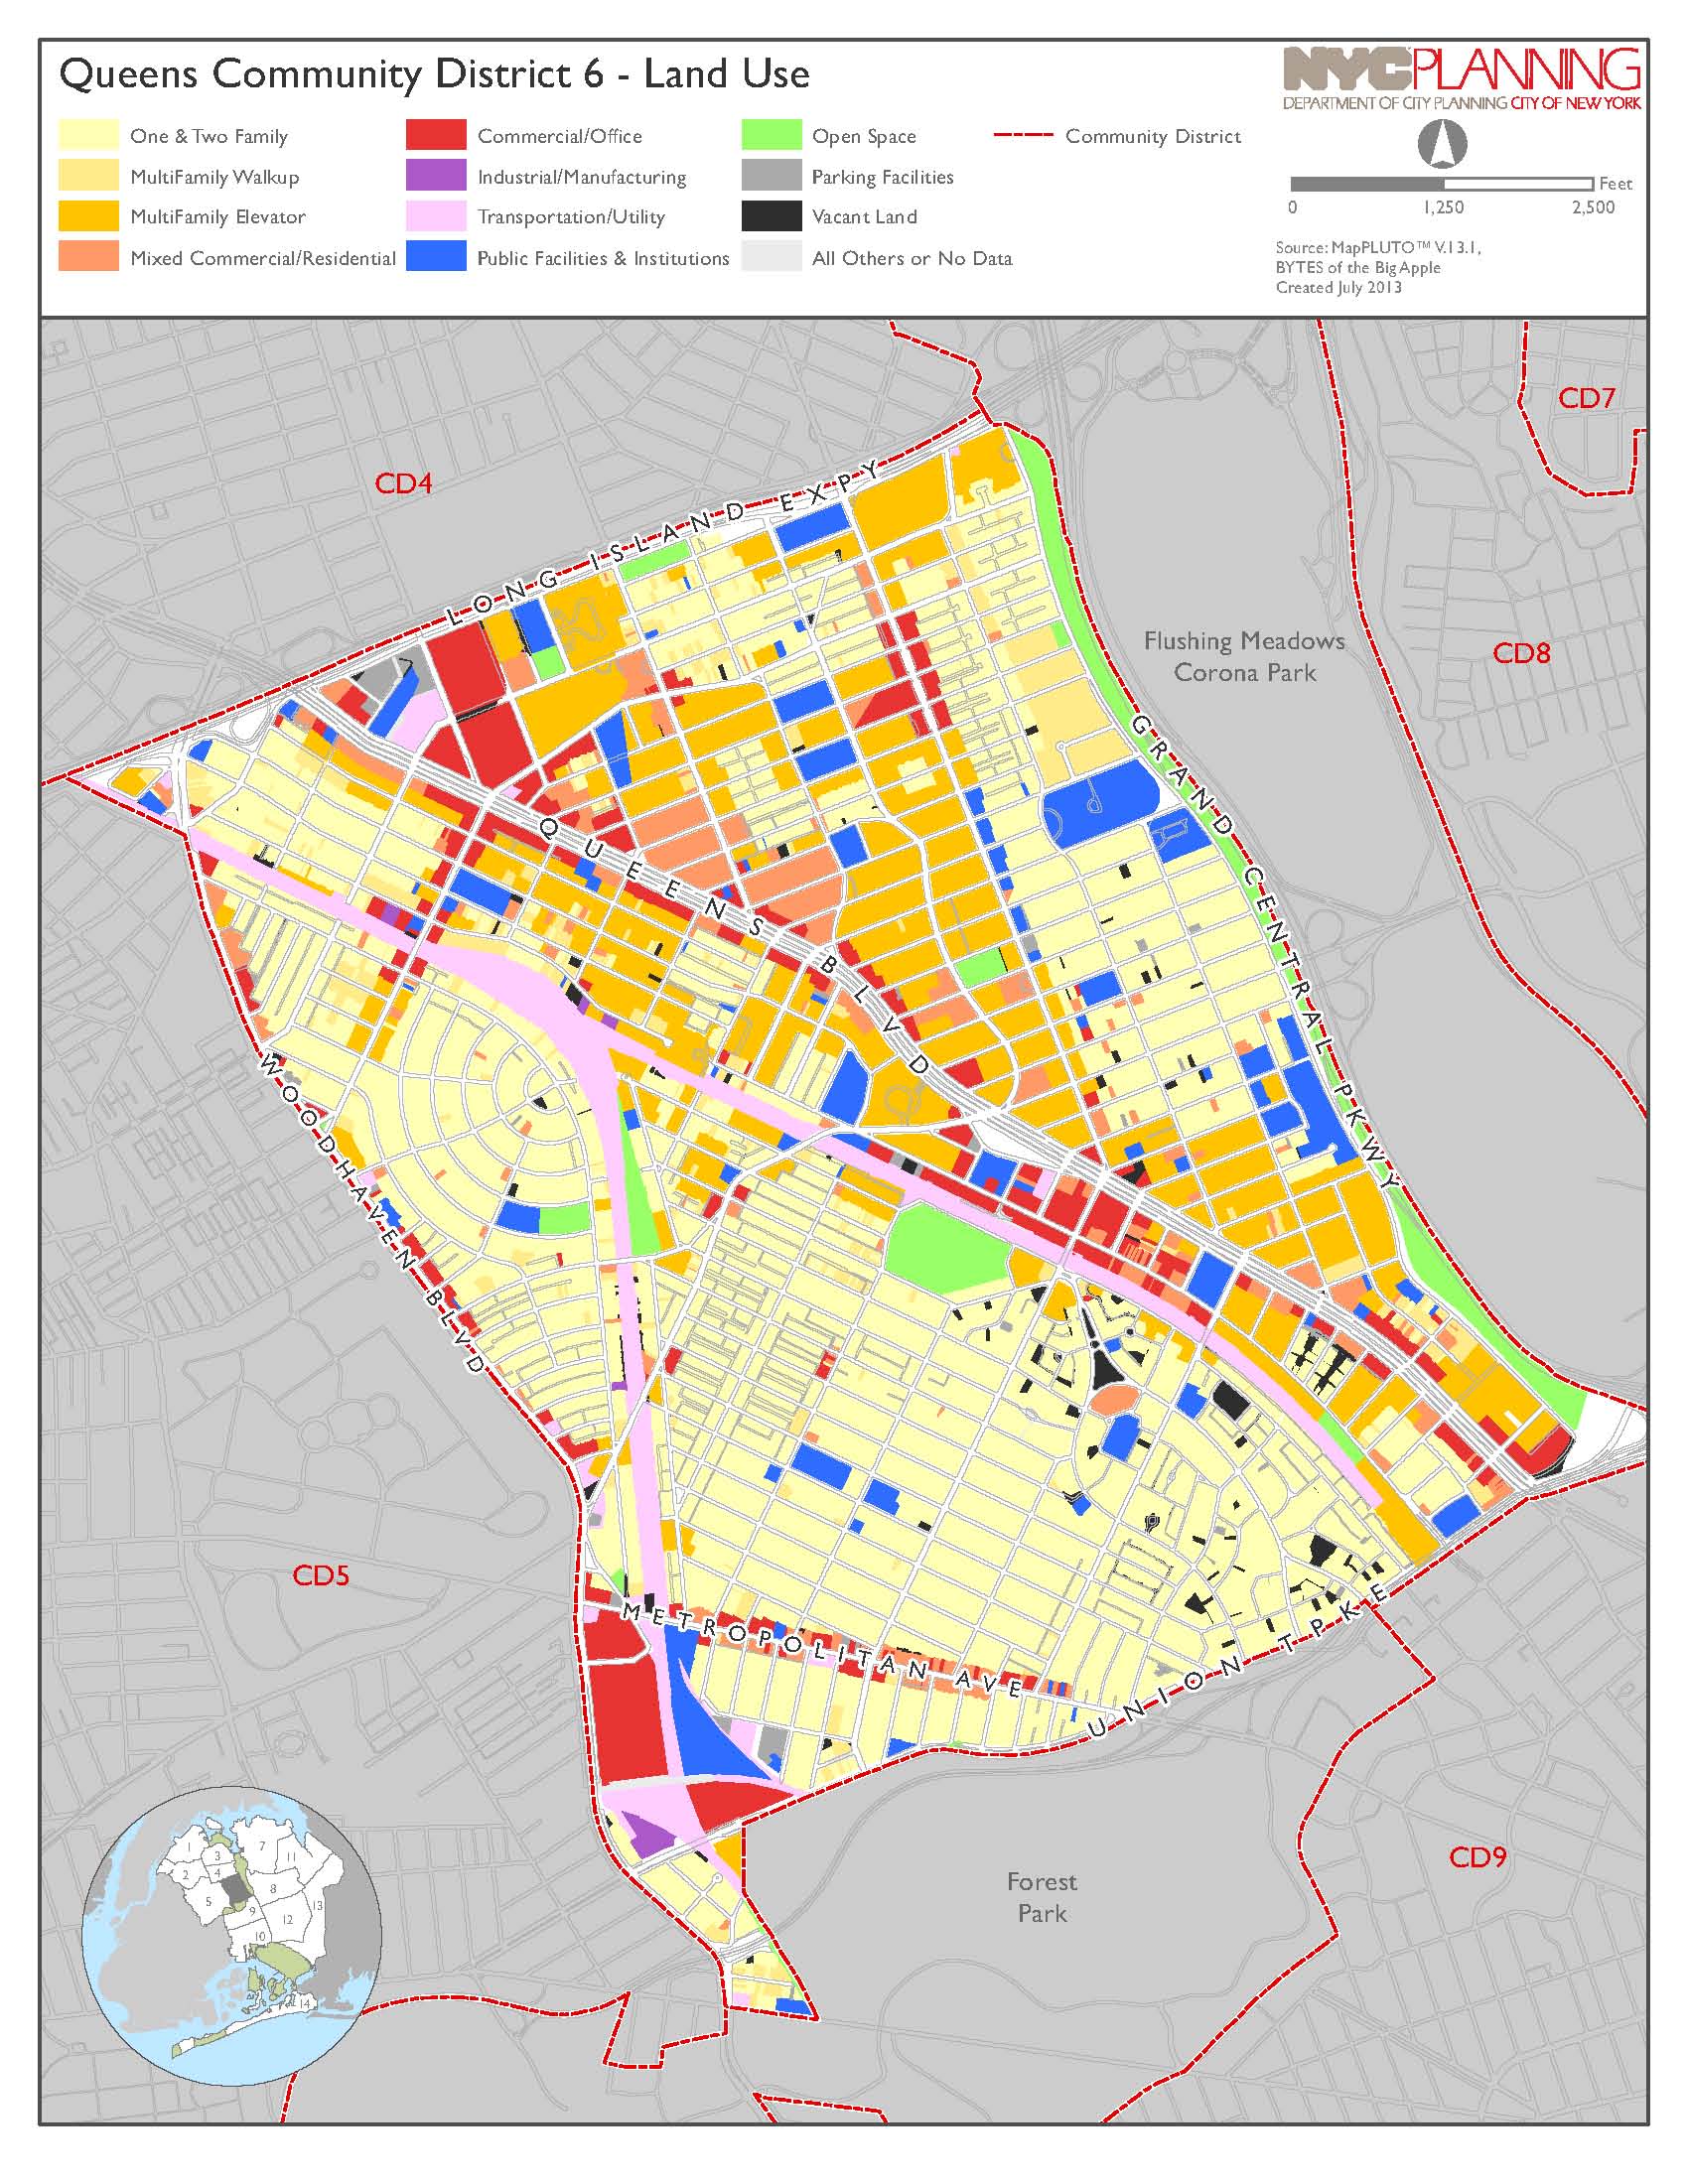 Queens Community District Land Use Map separated by land use type